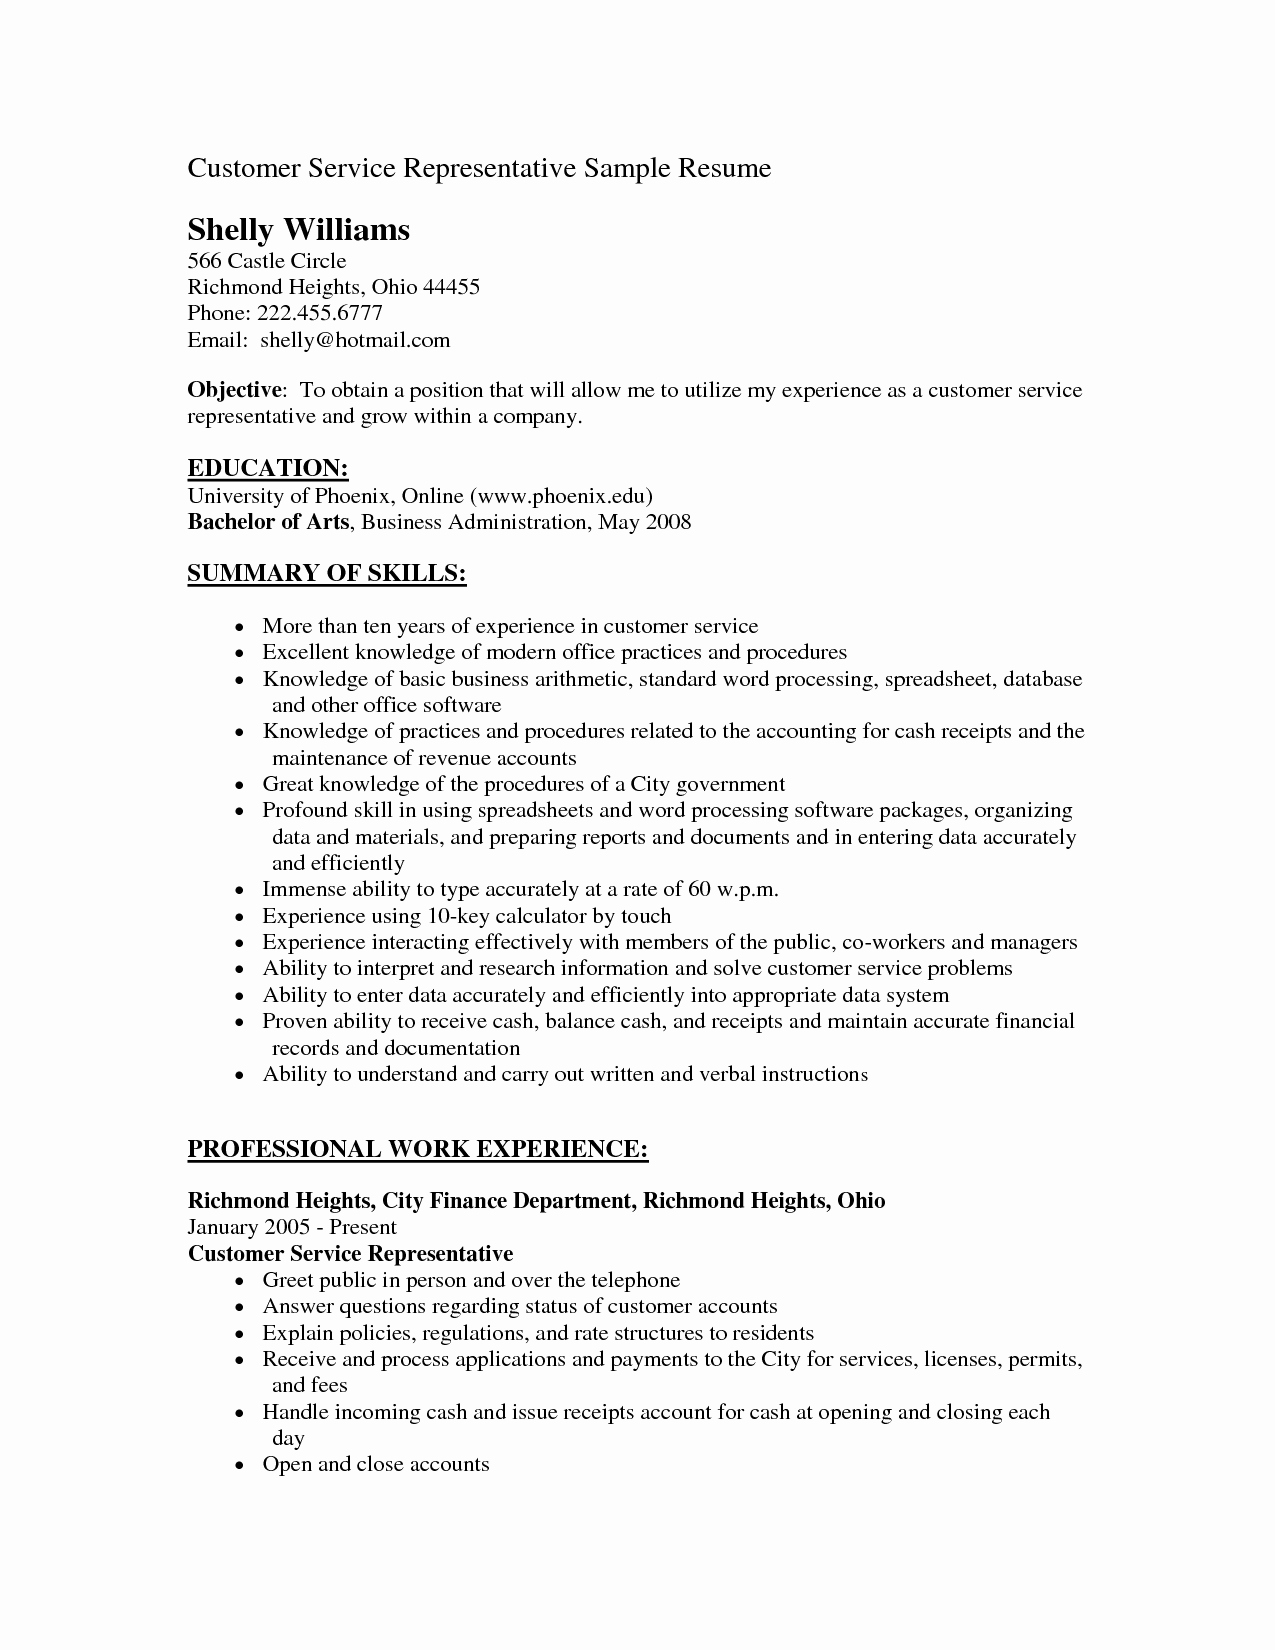 Resume Objective for Customer Service